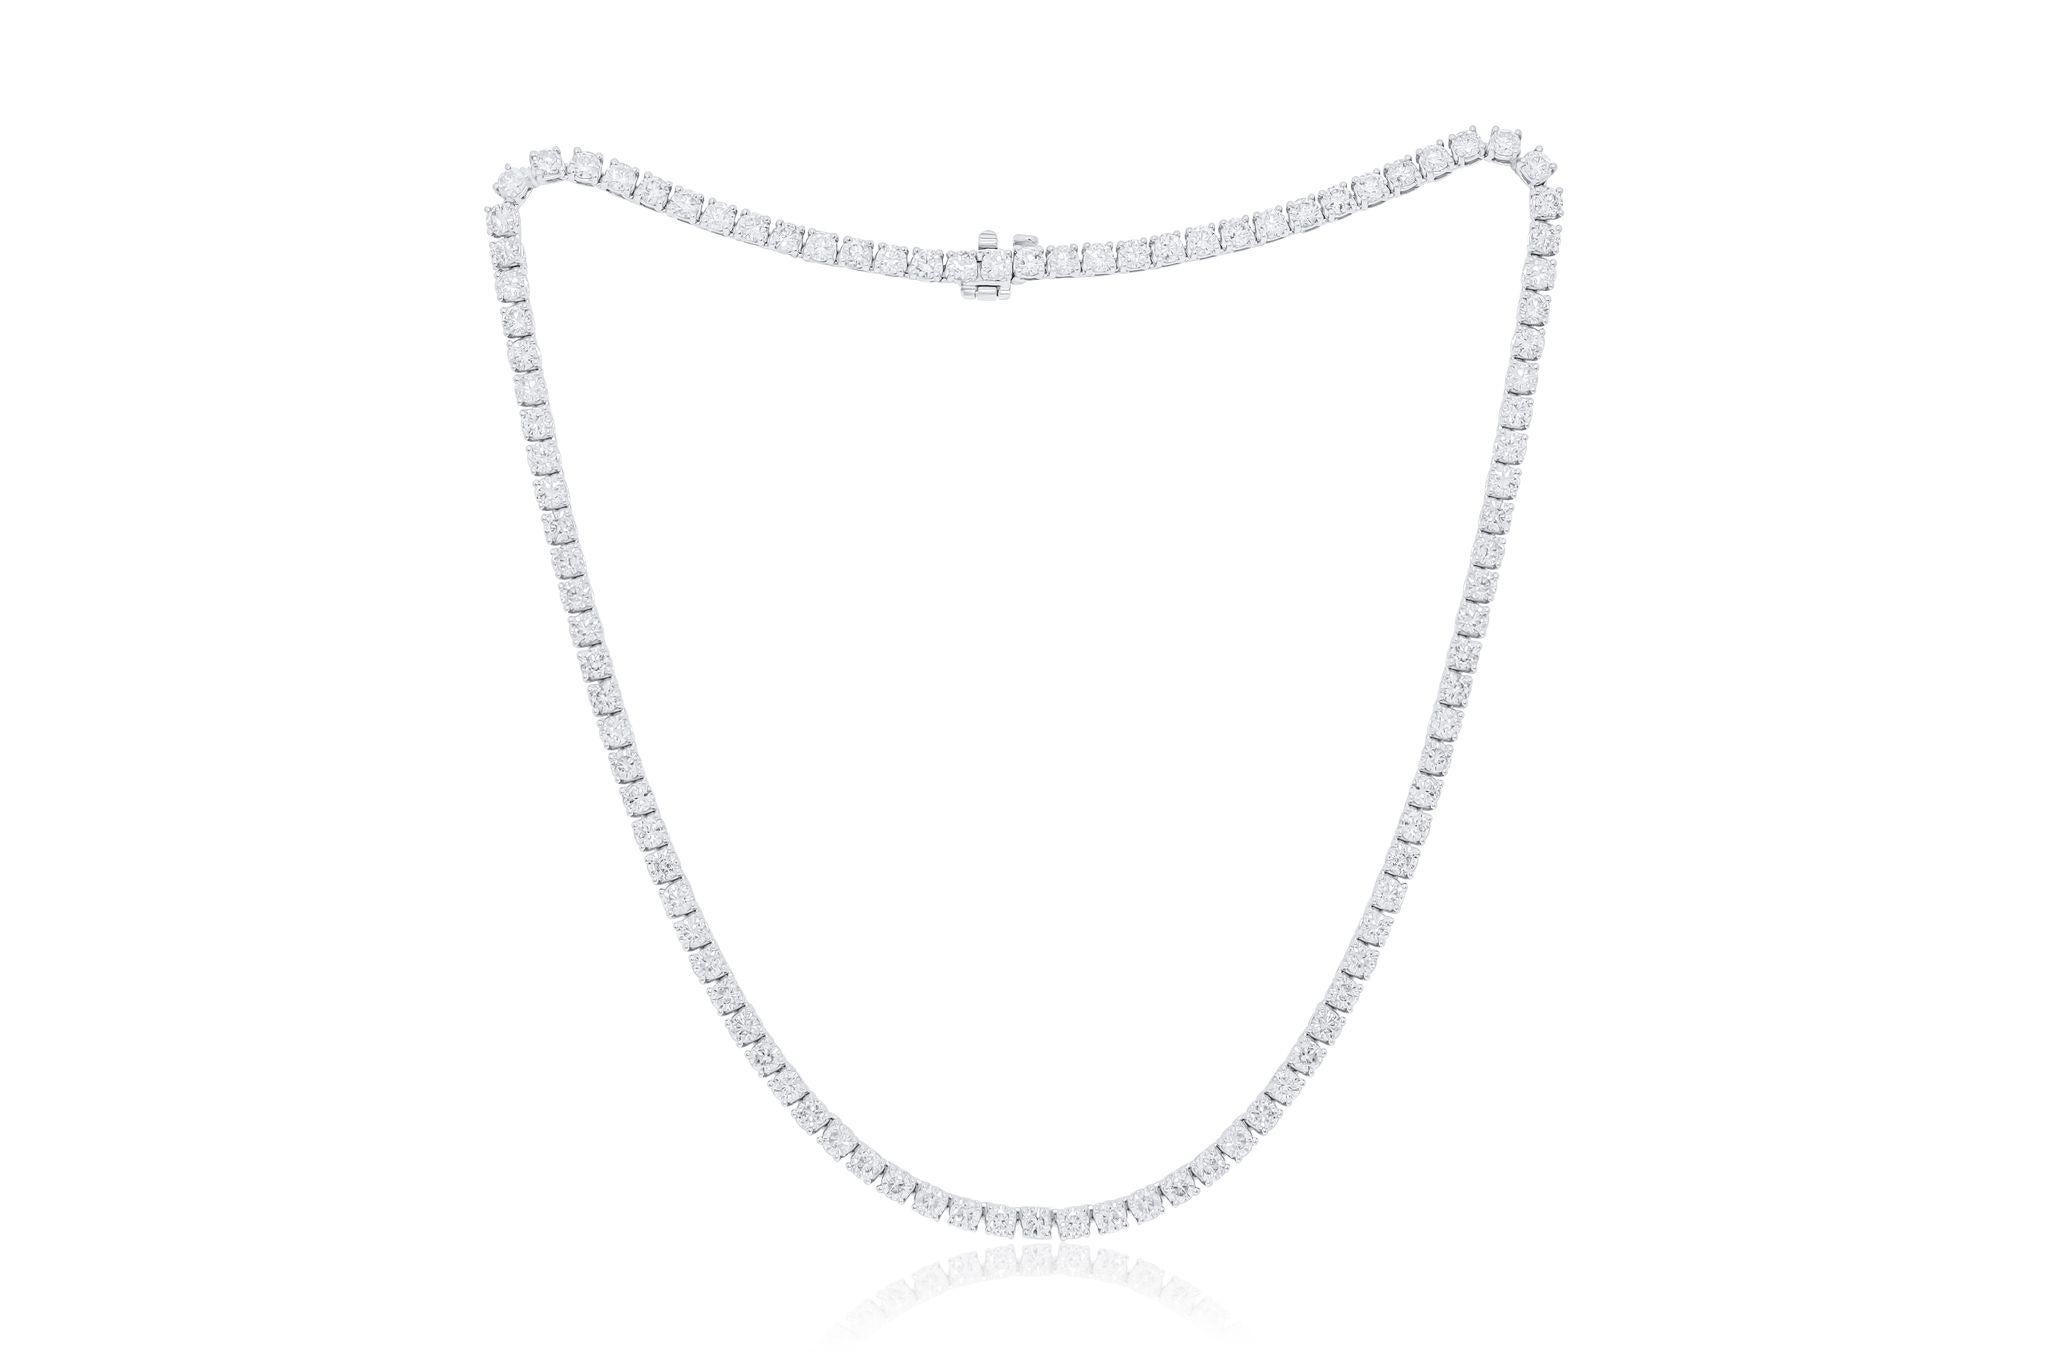 Indulge in the timeless elegance of our 18kt White Gold 4-prong Diamond Tennis Necklace, a captivating adornment that exudes sophistication and luxury. This exquisite necklace features a stunning arrangement of round diamonds, totaling an impressive